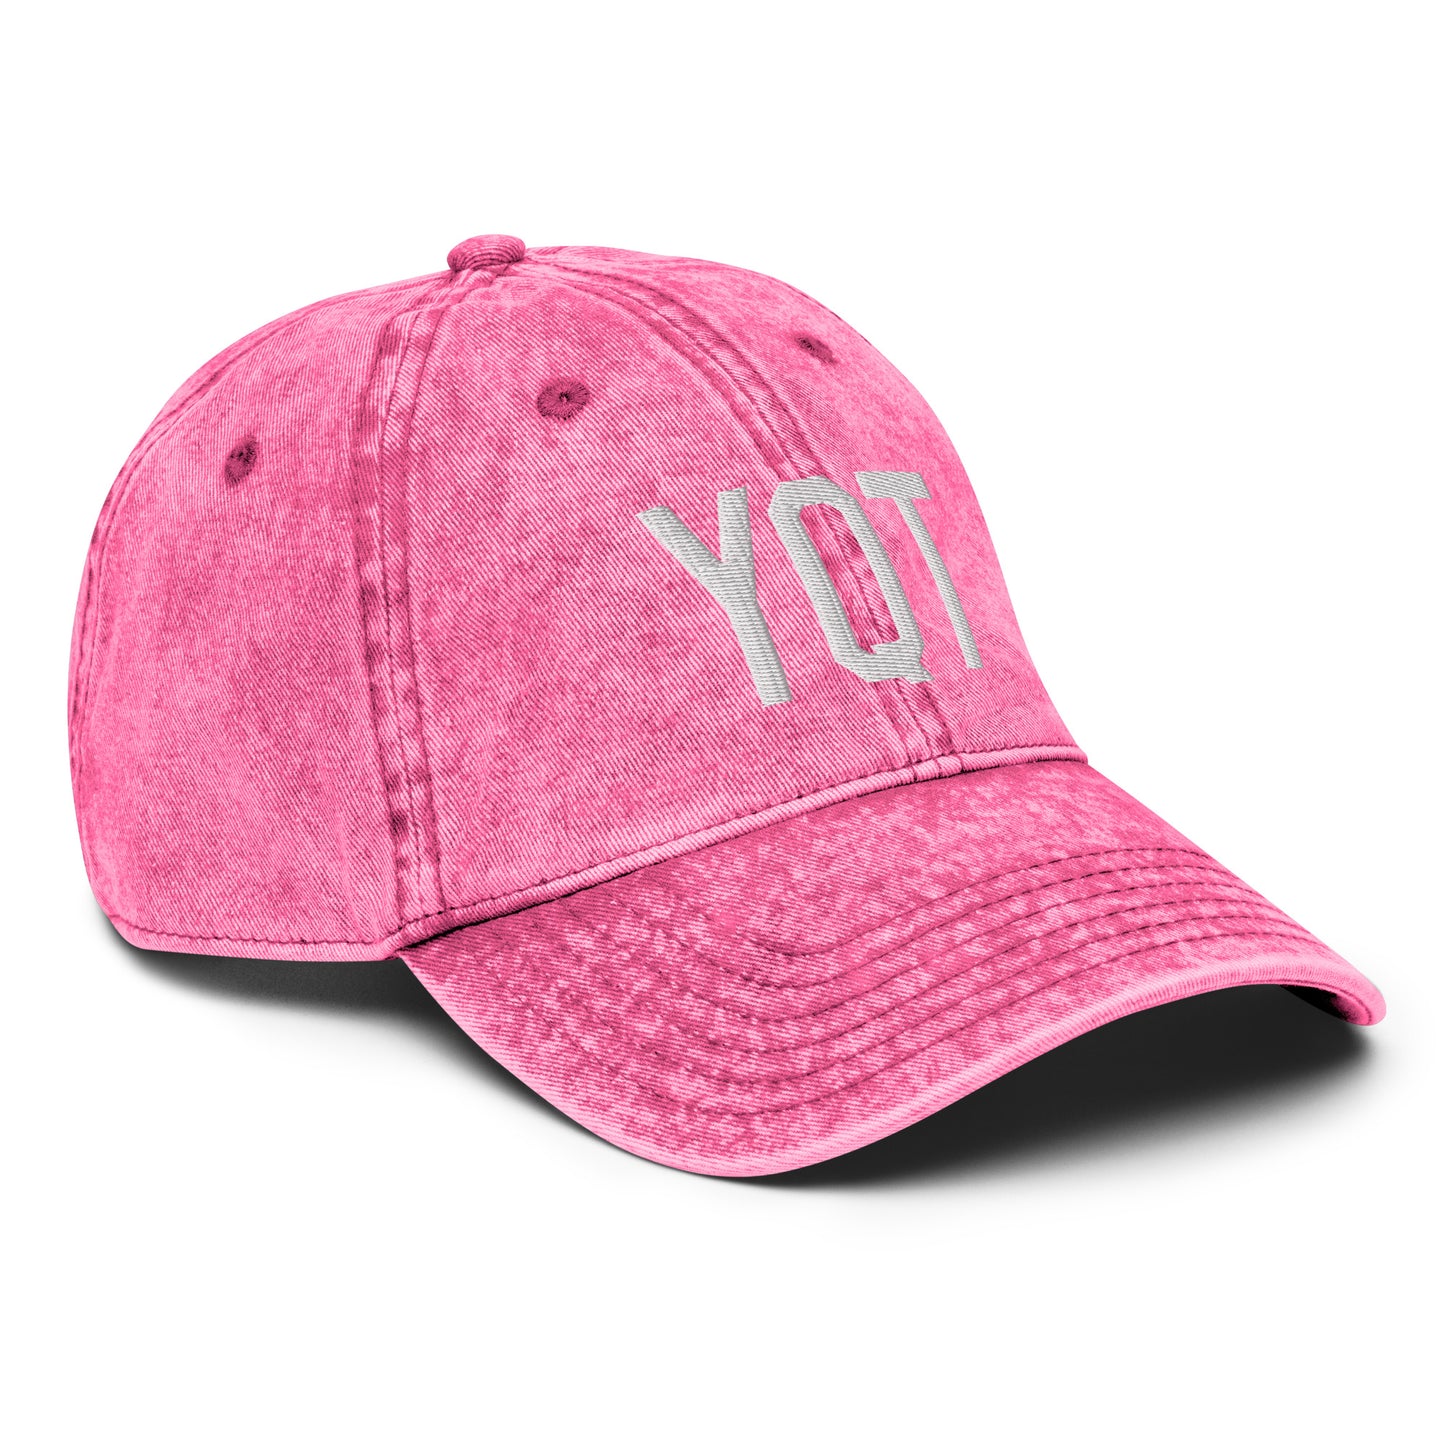 Airport Code Twill Cap - White • YQT Thunder Bay • YHM Designs - Image 27